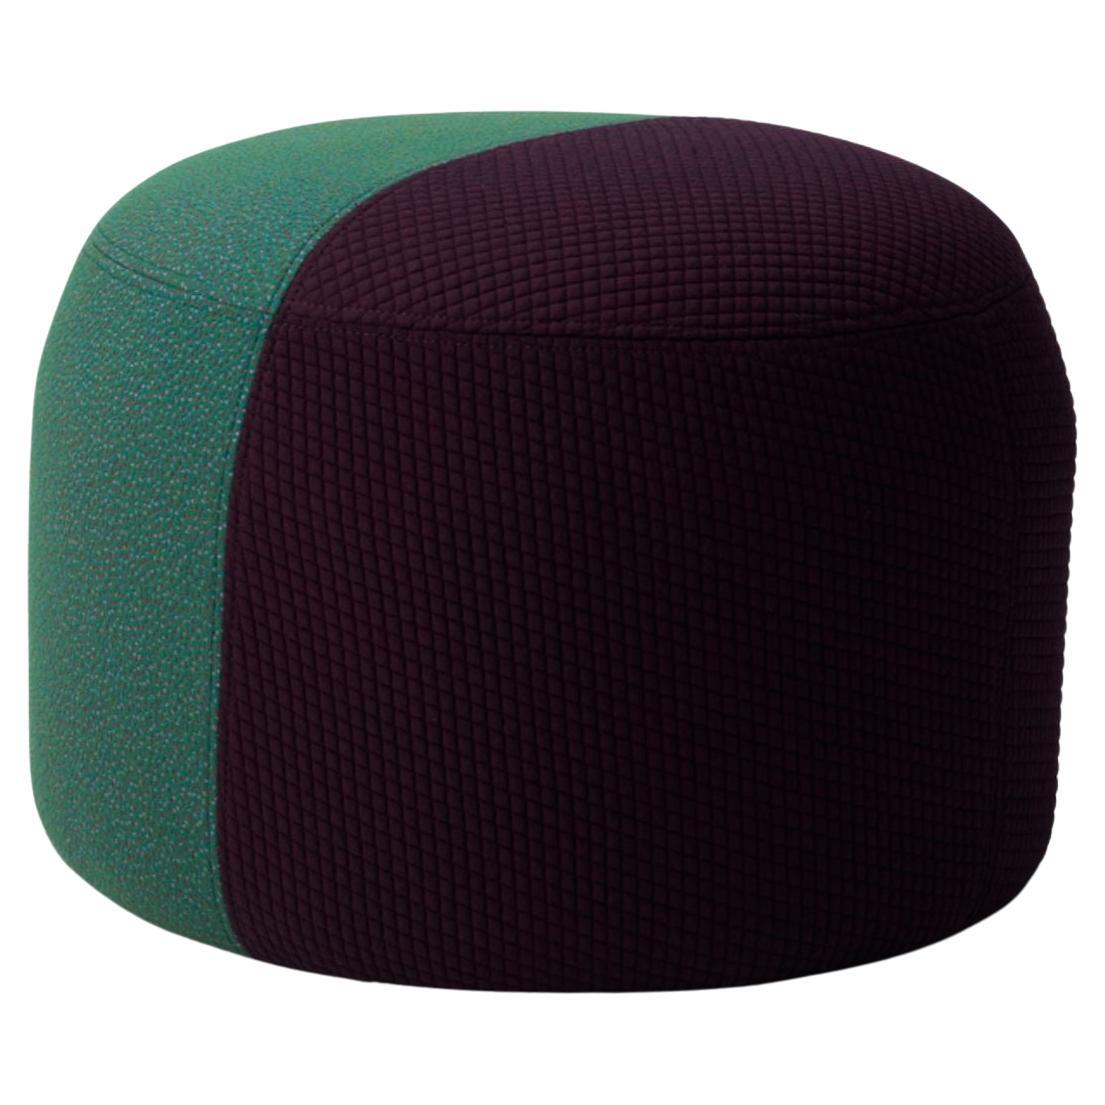 Dainty Pouf Mosaic Sprinkles Bordeaux Hunter Green by Warm Nordic For Sale